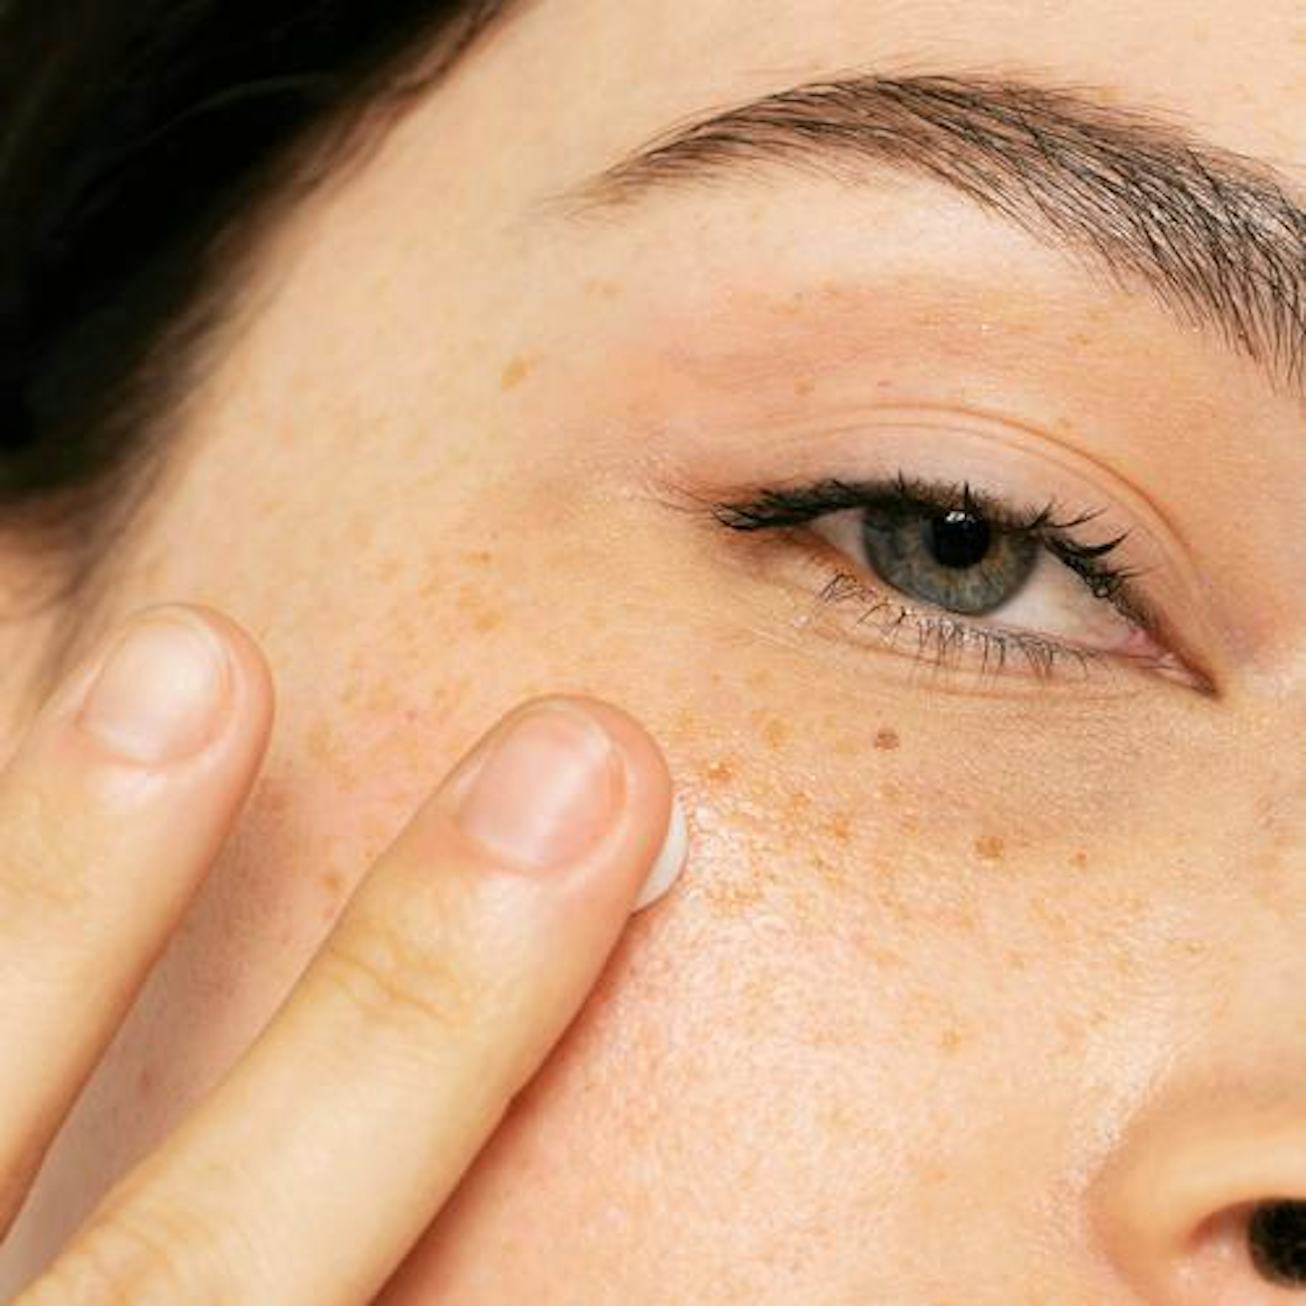 Model uses finger to apply product to under eye area